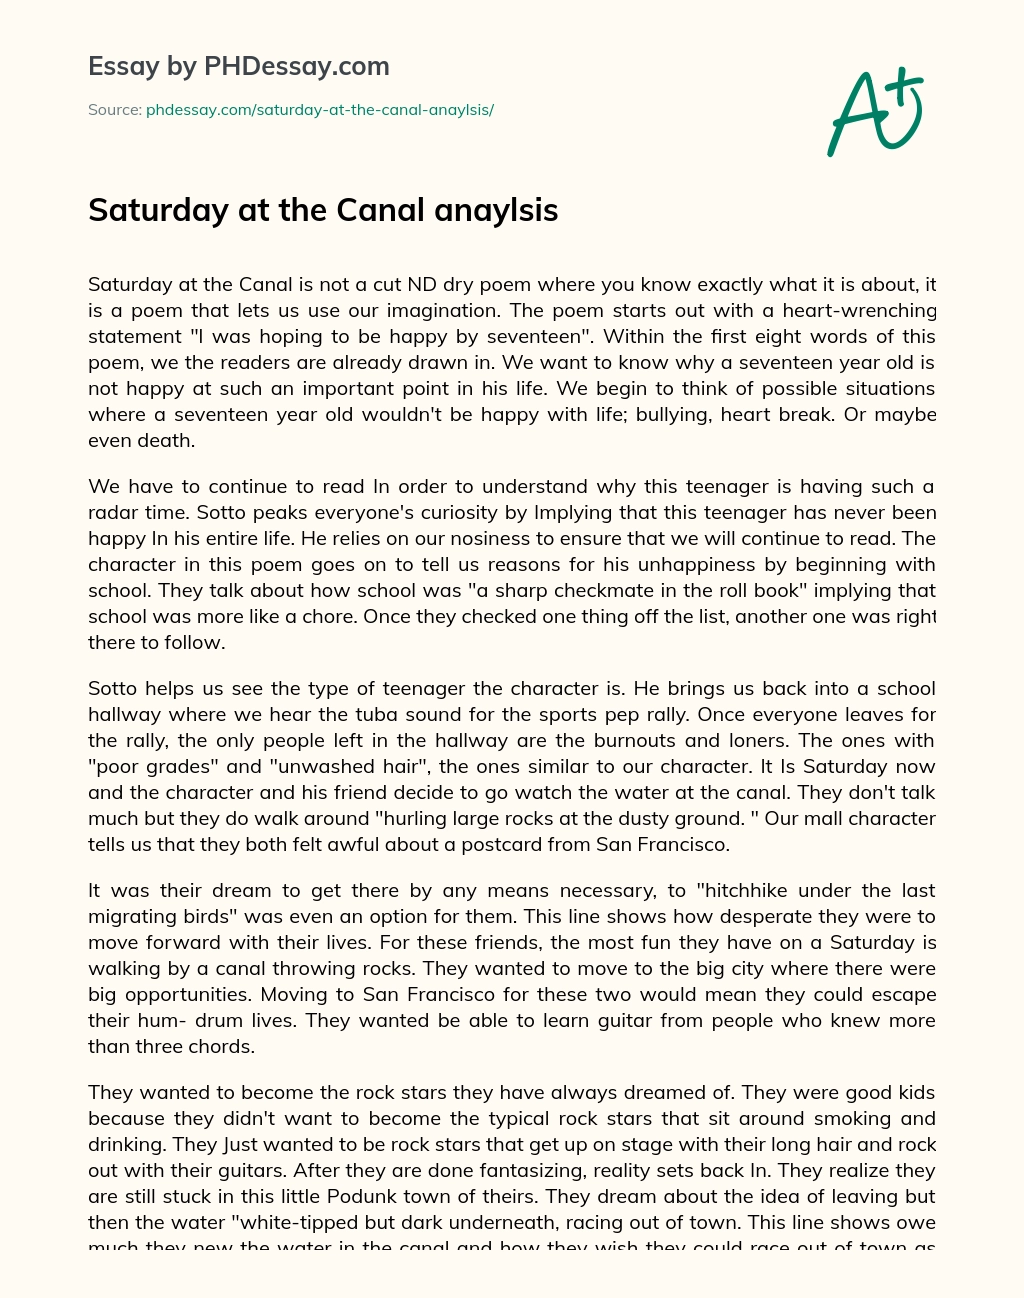 Saturday at the Canal anaylsis essay